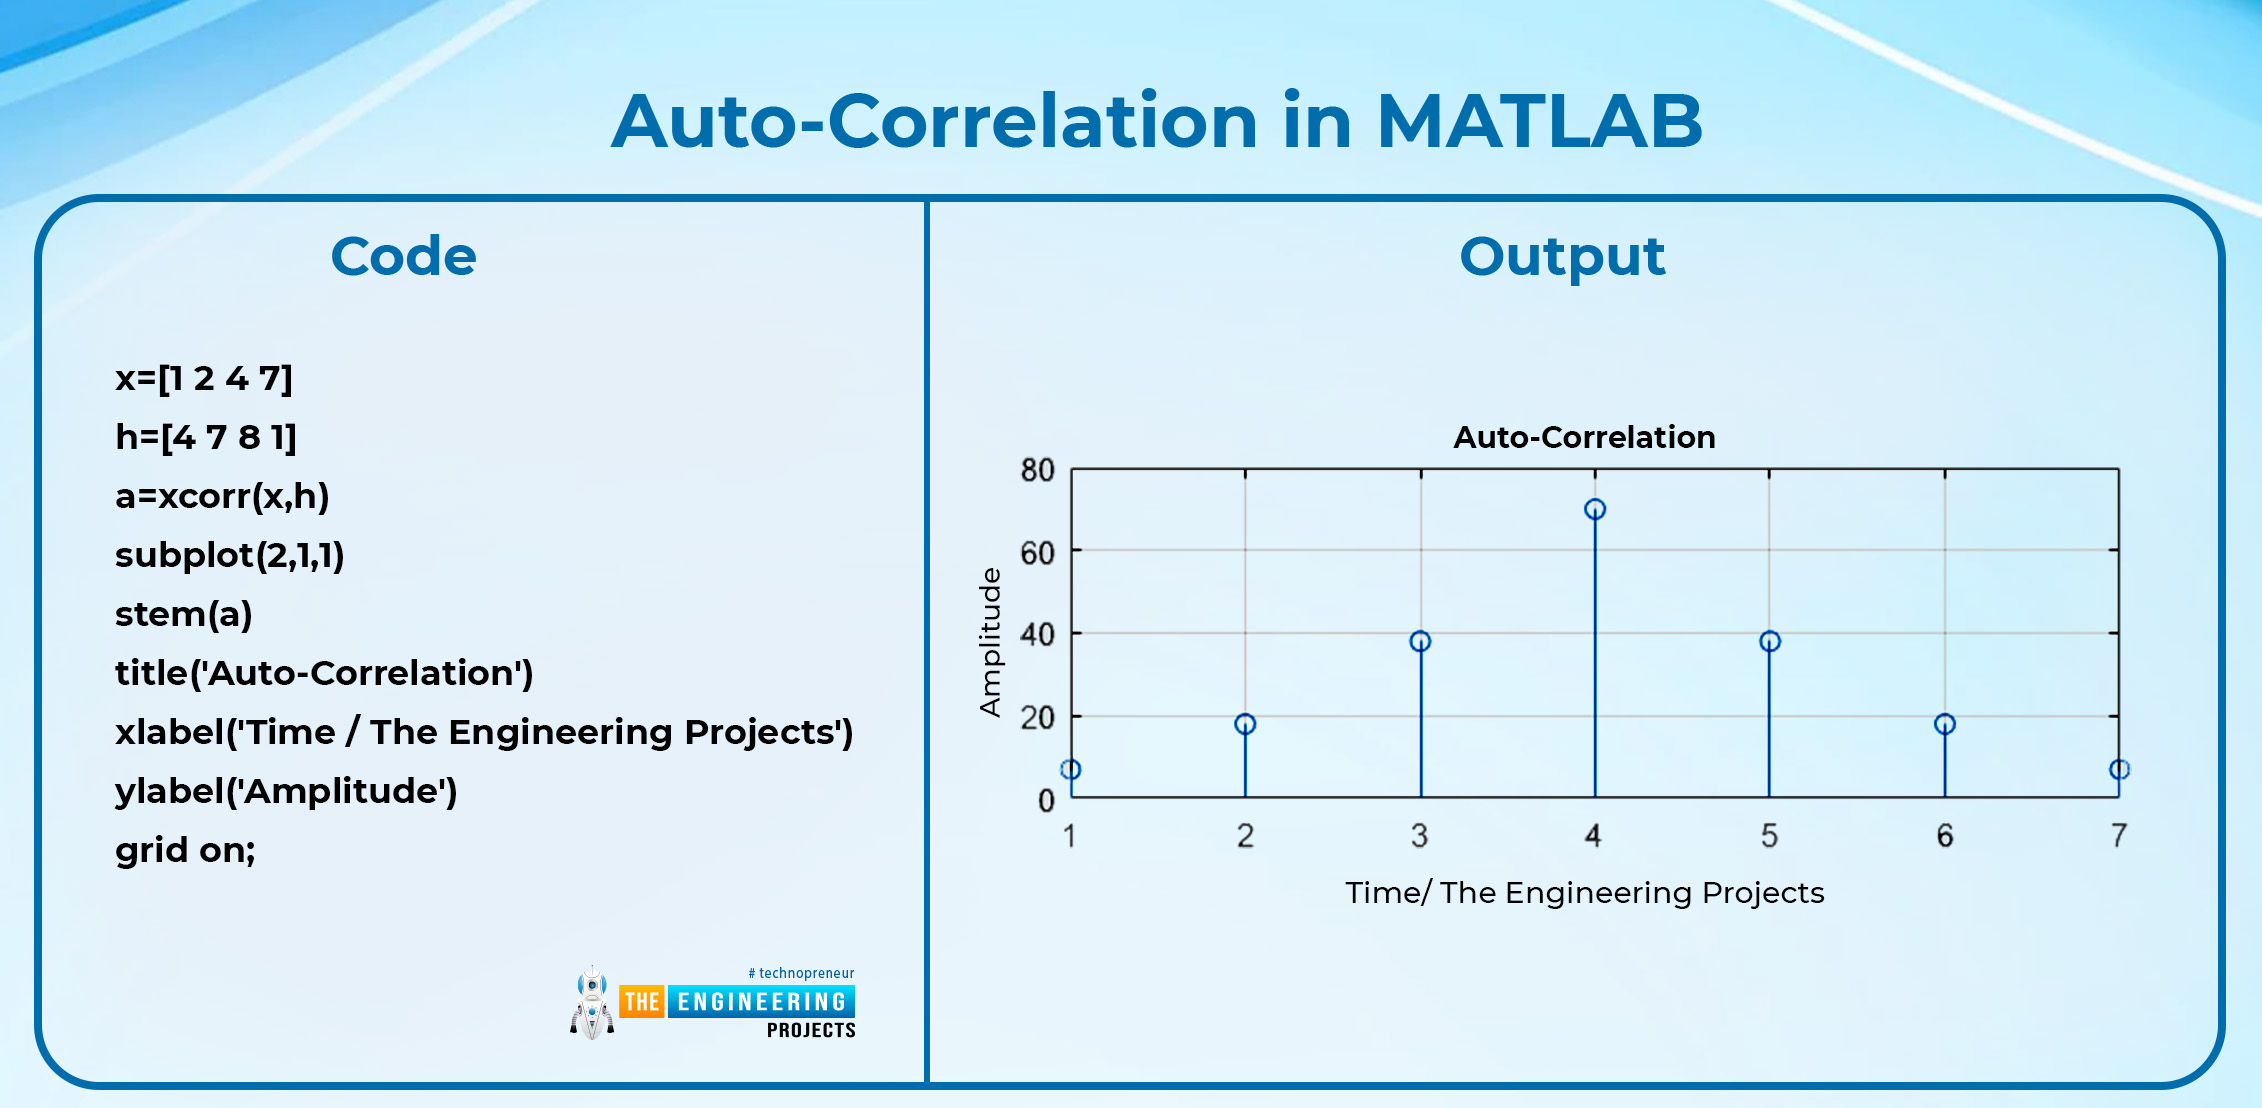 convolution properties in matlab, matlab convolution, convolution in matlab, convolution in signal and systems